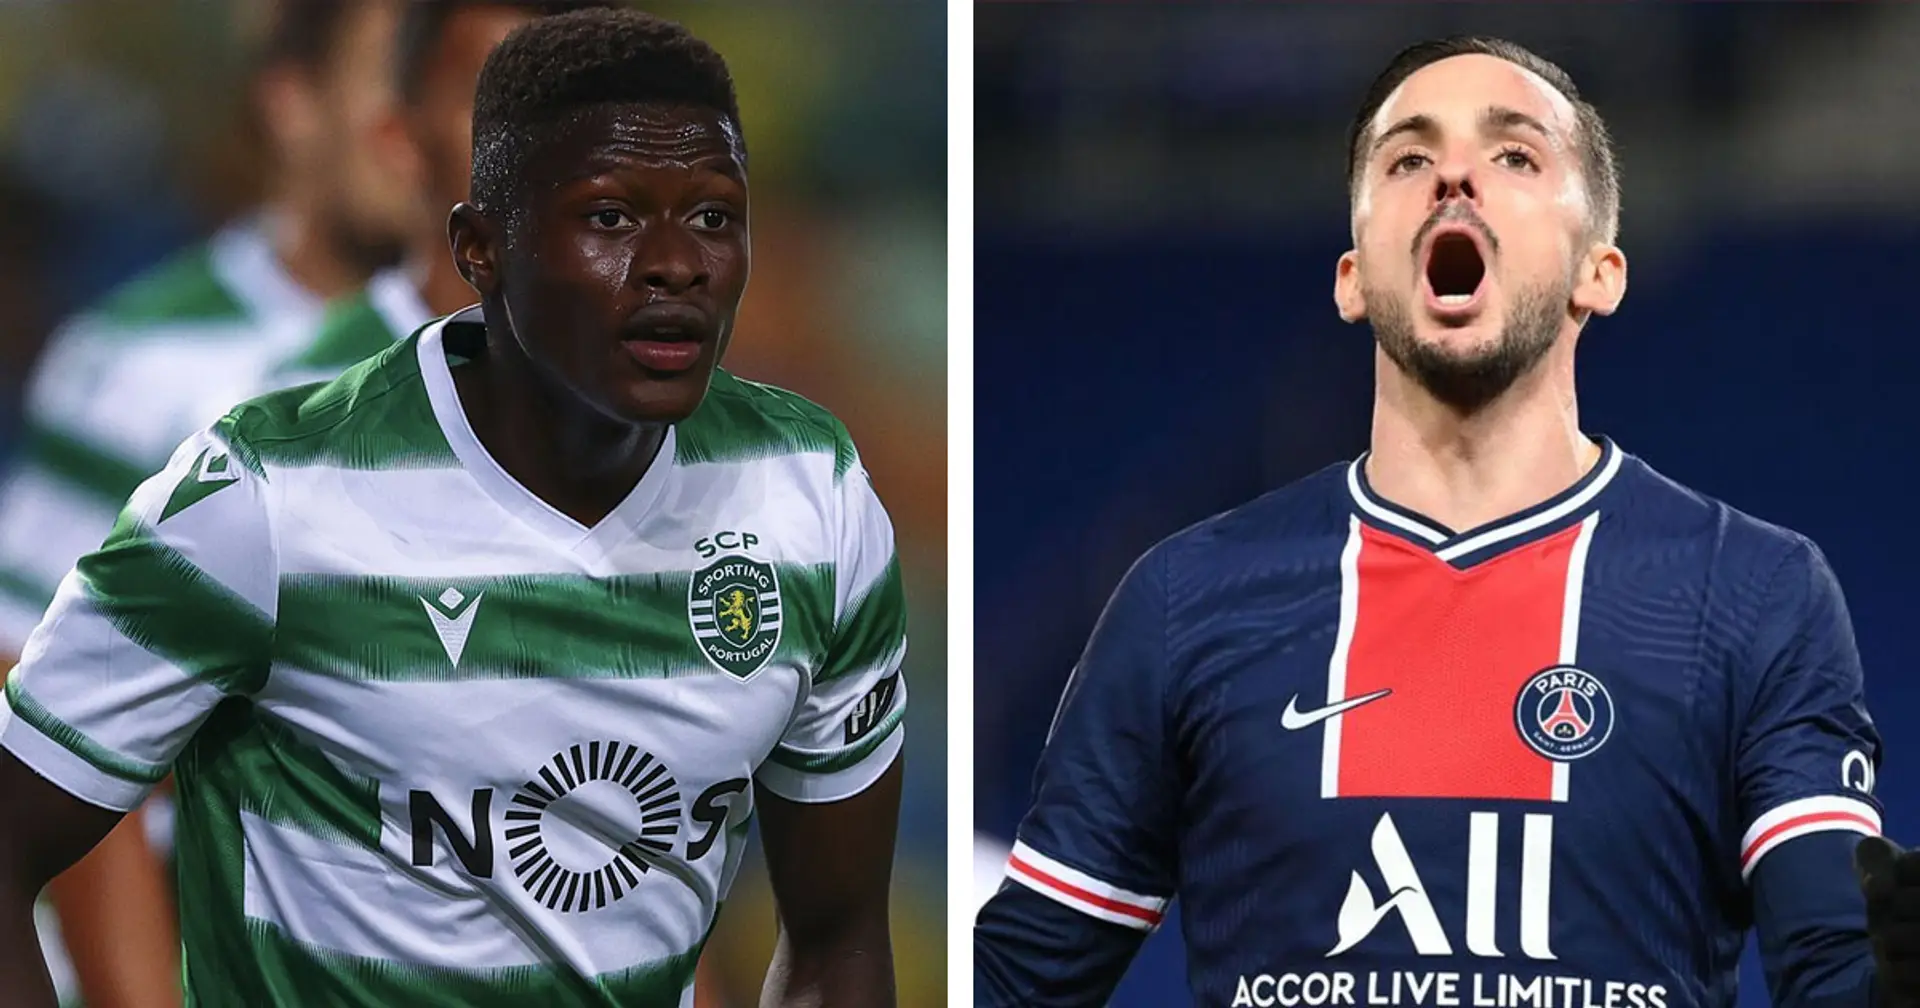 PSG close to landing Sporting wonderkid Nuno Mendes, Sarabia going opposite direction (reliability: 5 stars)